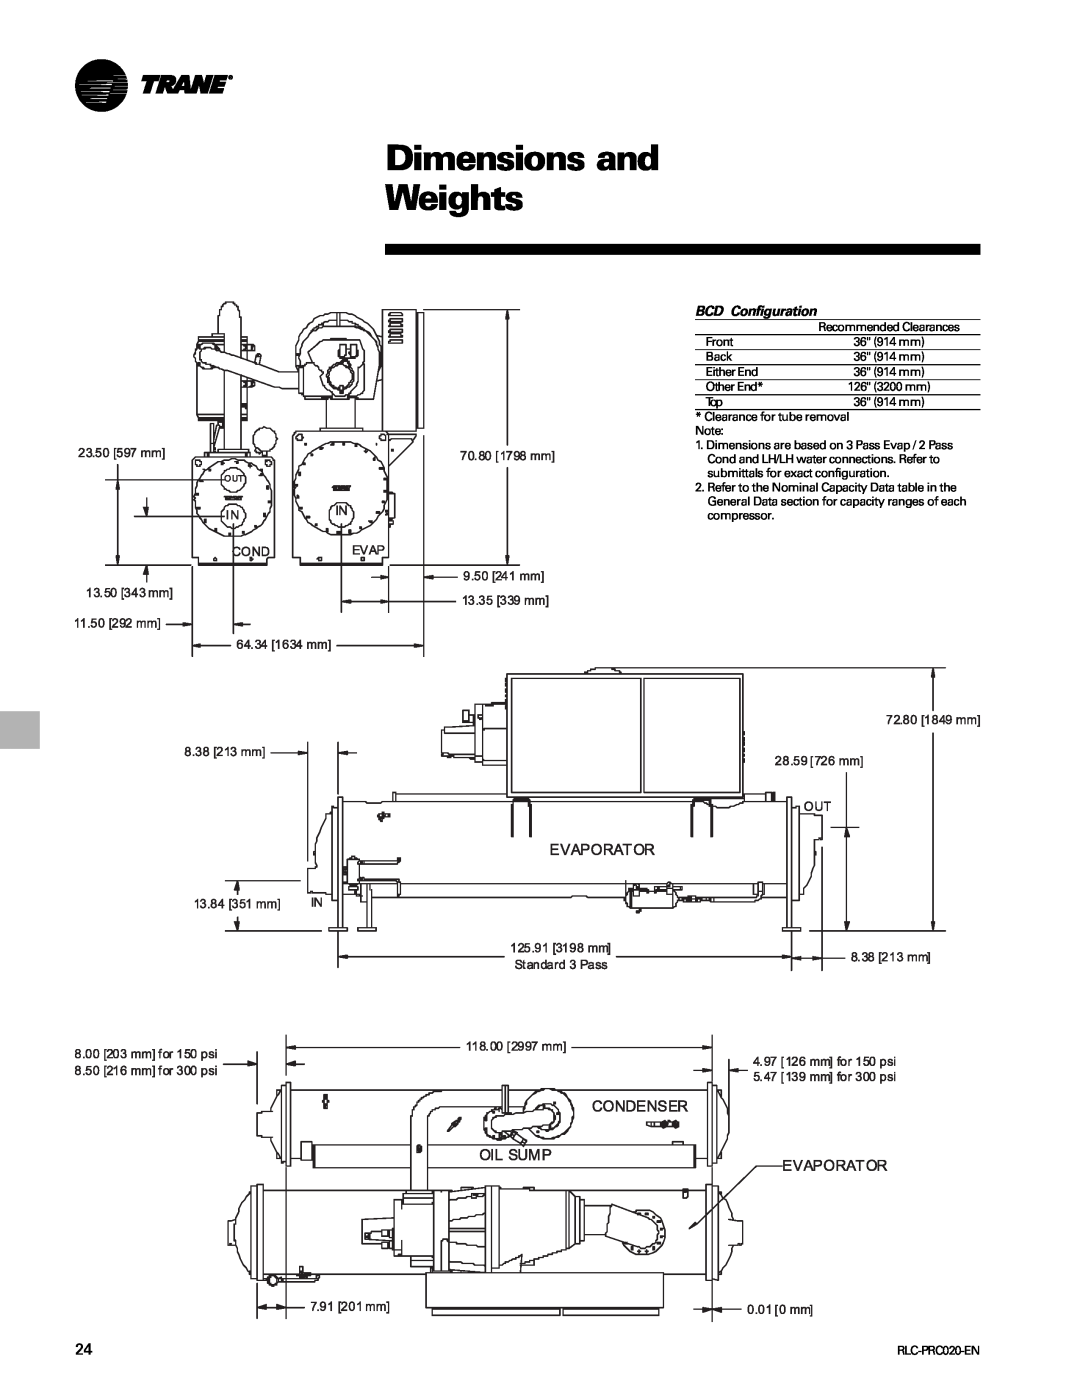 Trane RTHD manual Dimensions and Weights, BCD Configuration 